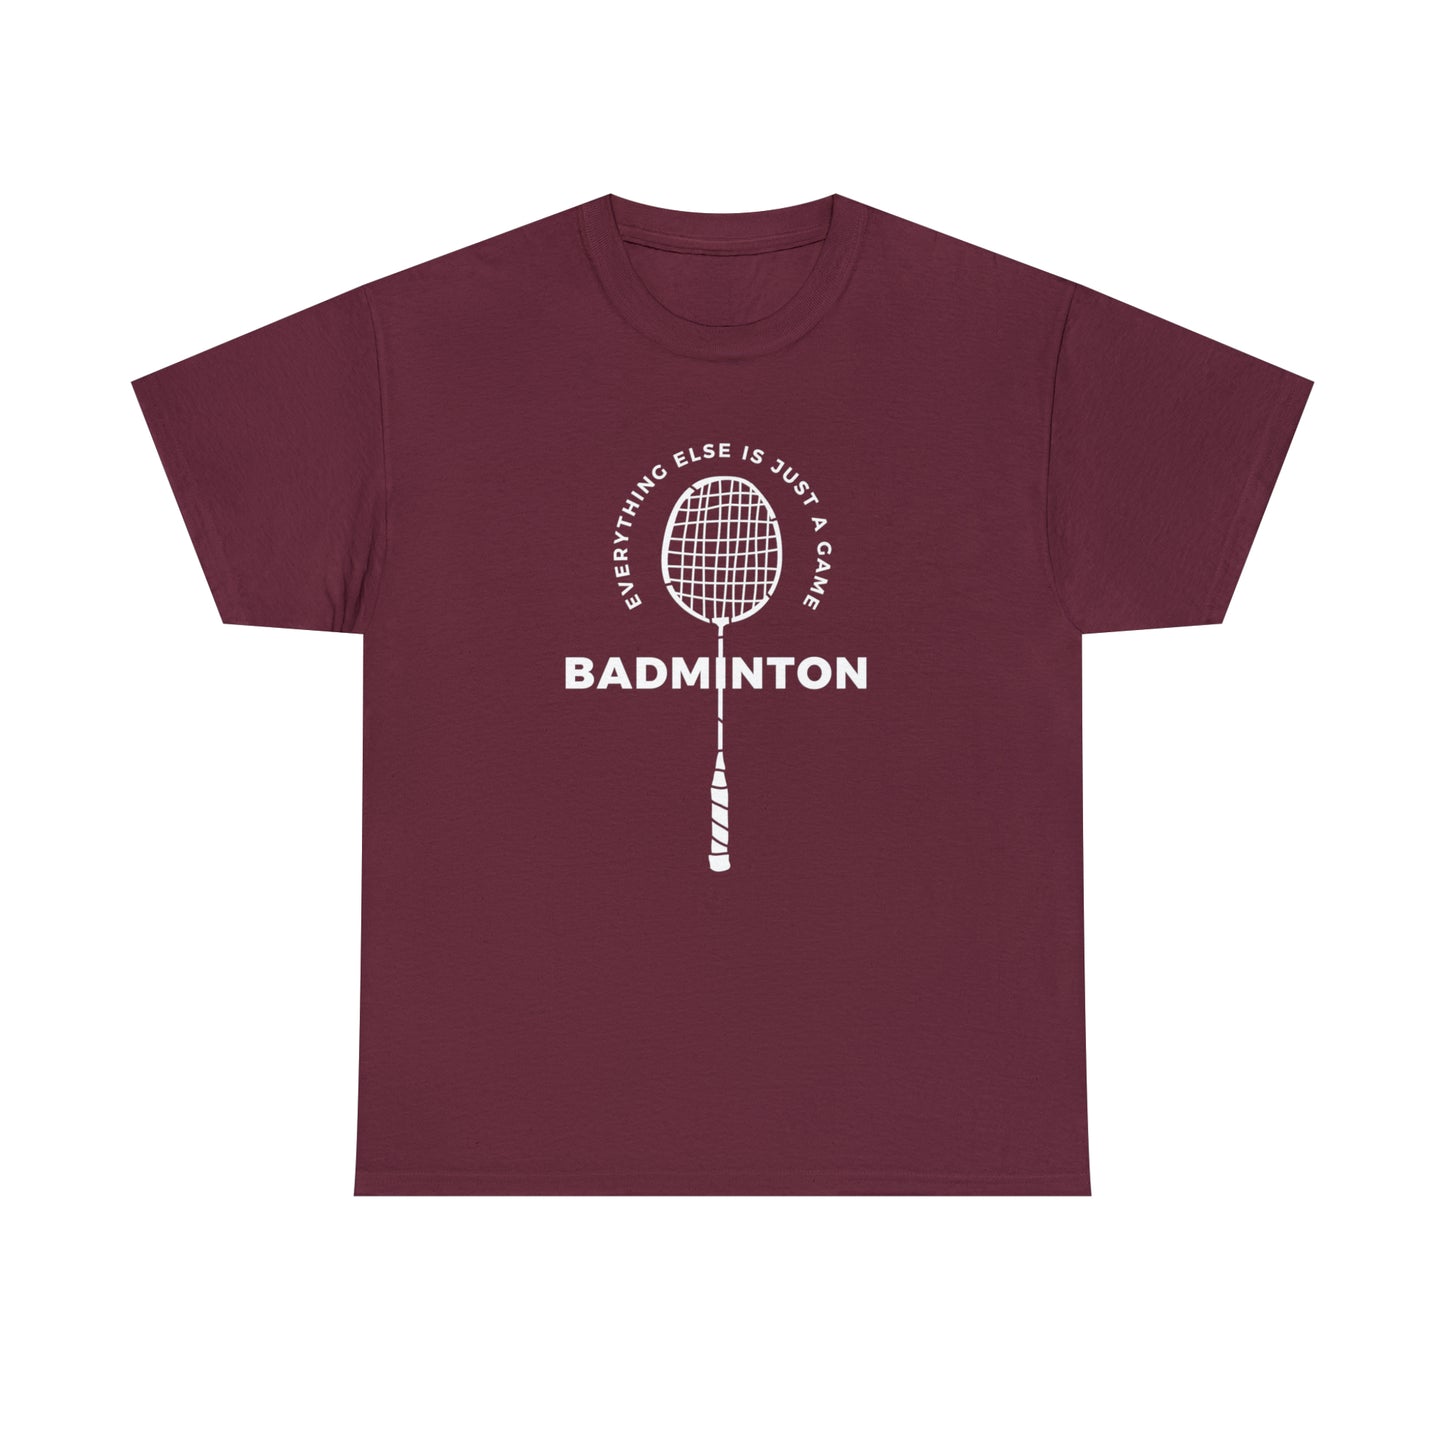 Everything Else is Just a Game (Badminton) T-Shirt